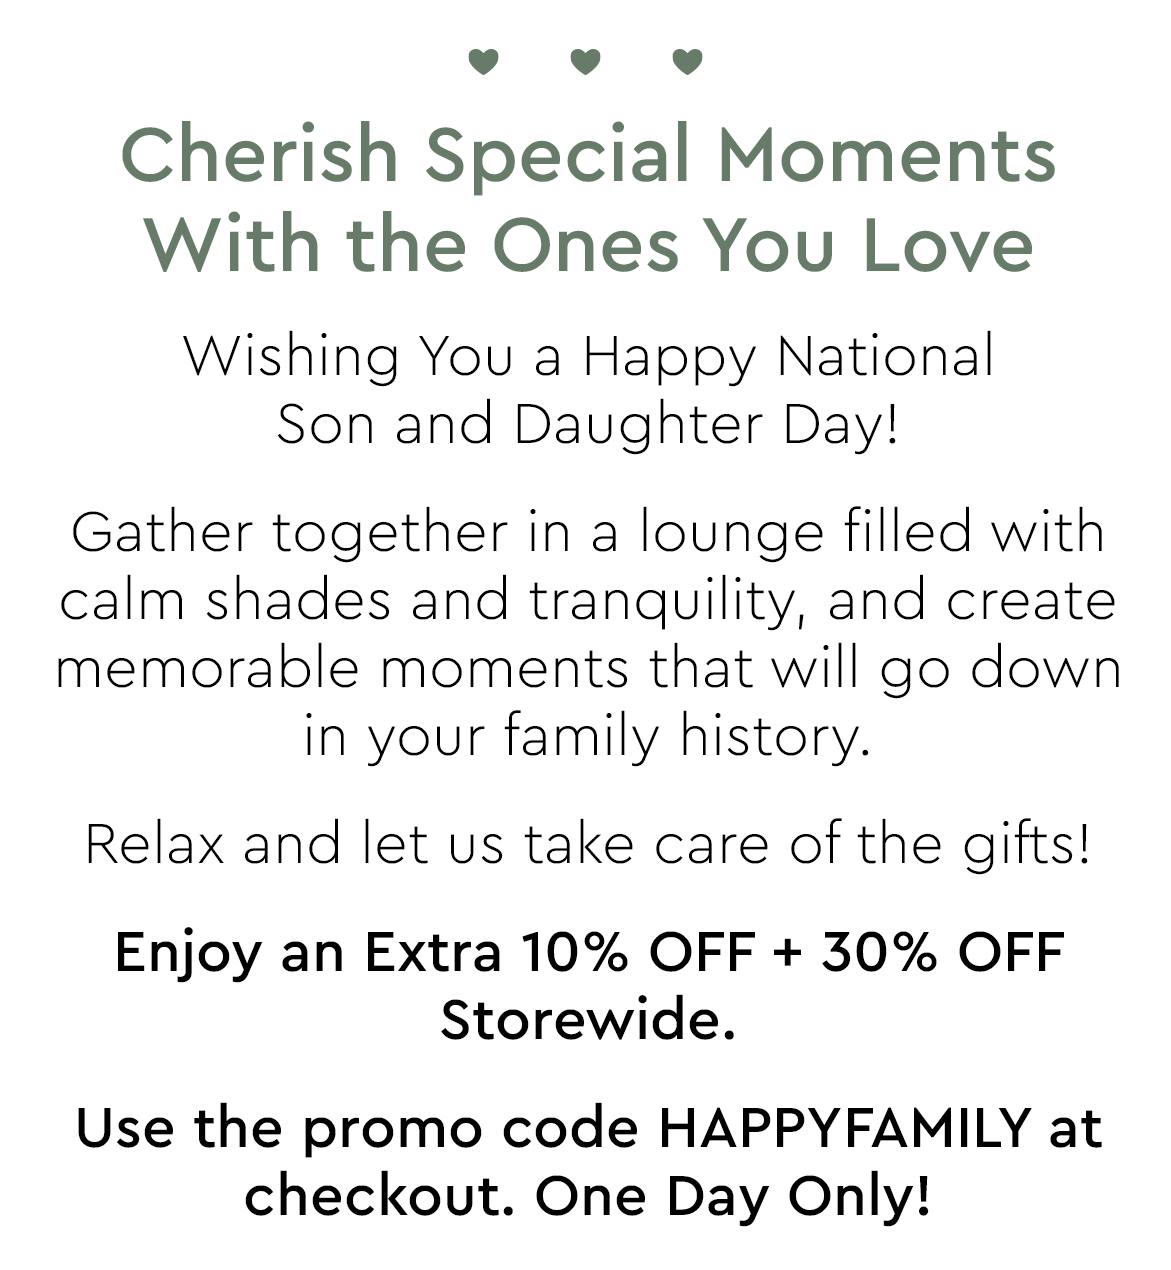 Cherish Special Moments With the Ones You Love Wishing You a Happy National Son and Daughter Day! Gather together in a lounge filled with calm shades and tranquility, and create memorable moments that will go down in your family history. Relax and let us take care of the gifts! Enjoy an Extra 10% OFF 30% OFF Storewide. Use the promo code HAPPYFAMILY at checkout. One Day Only! 